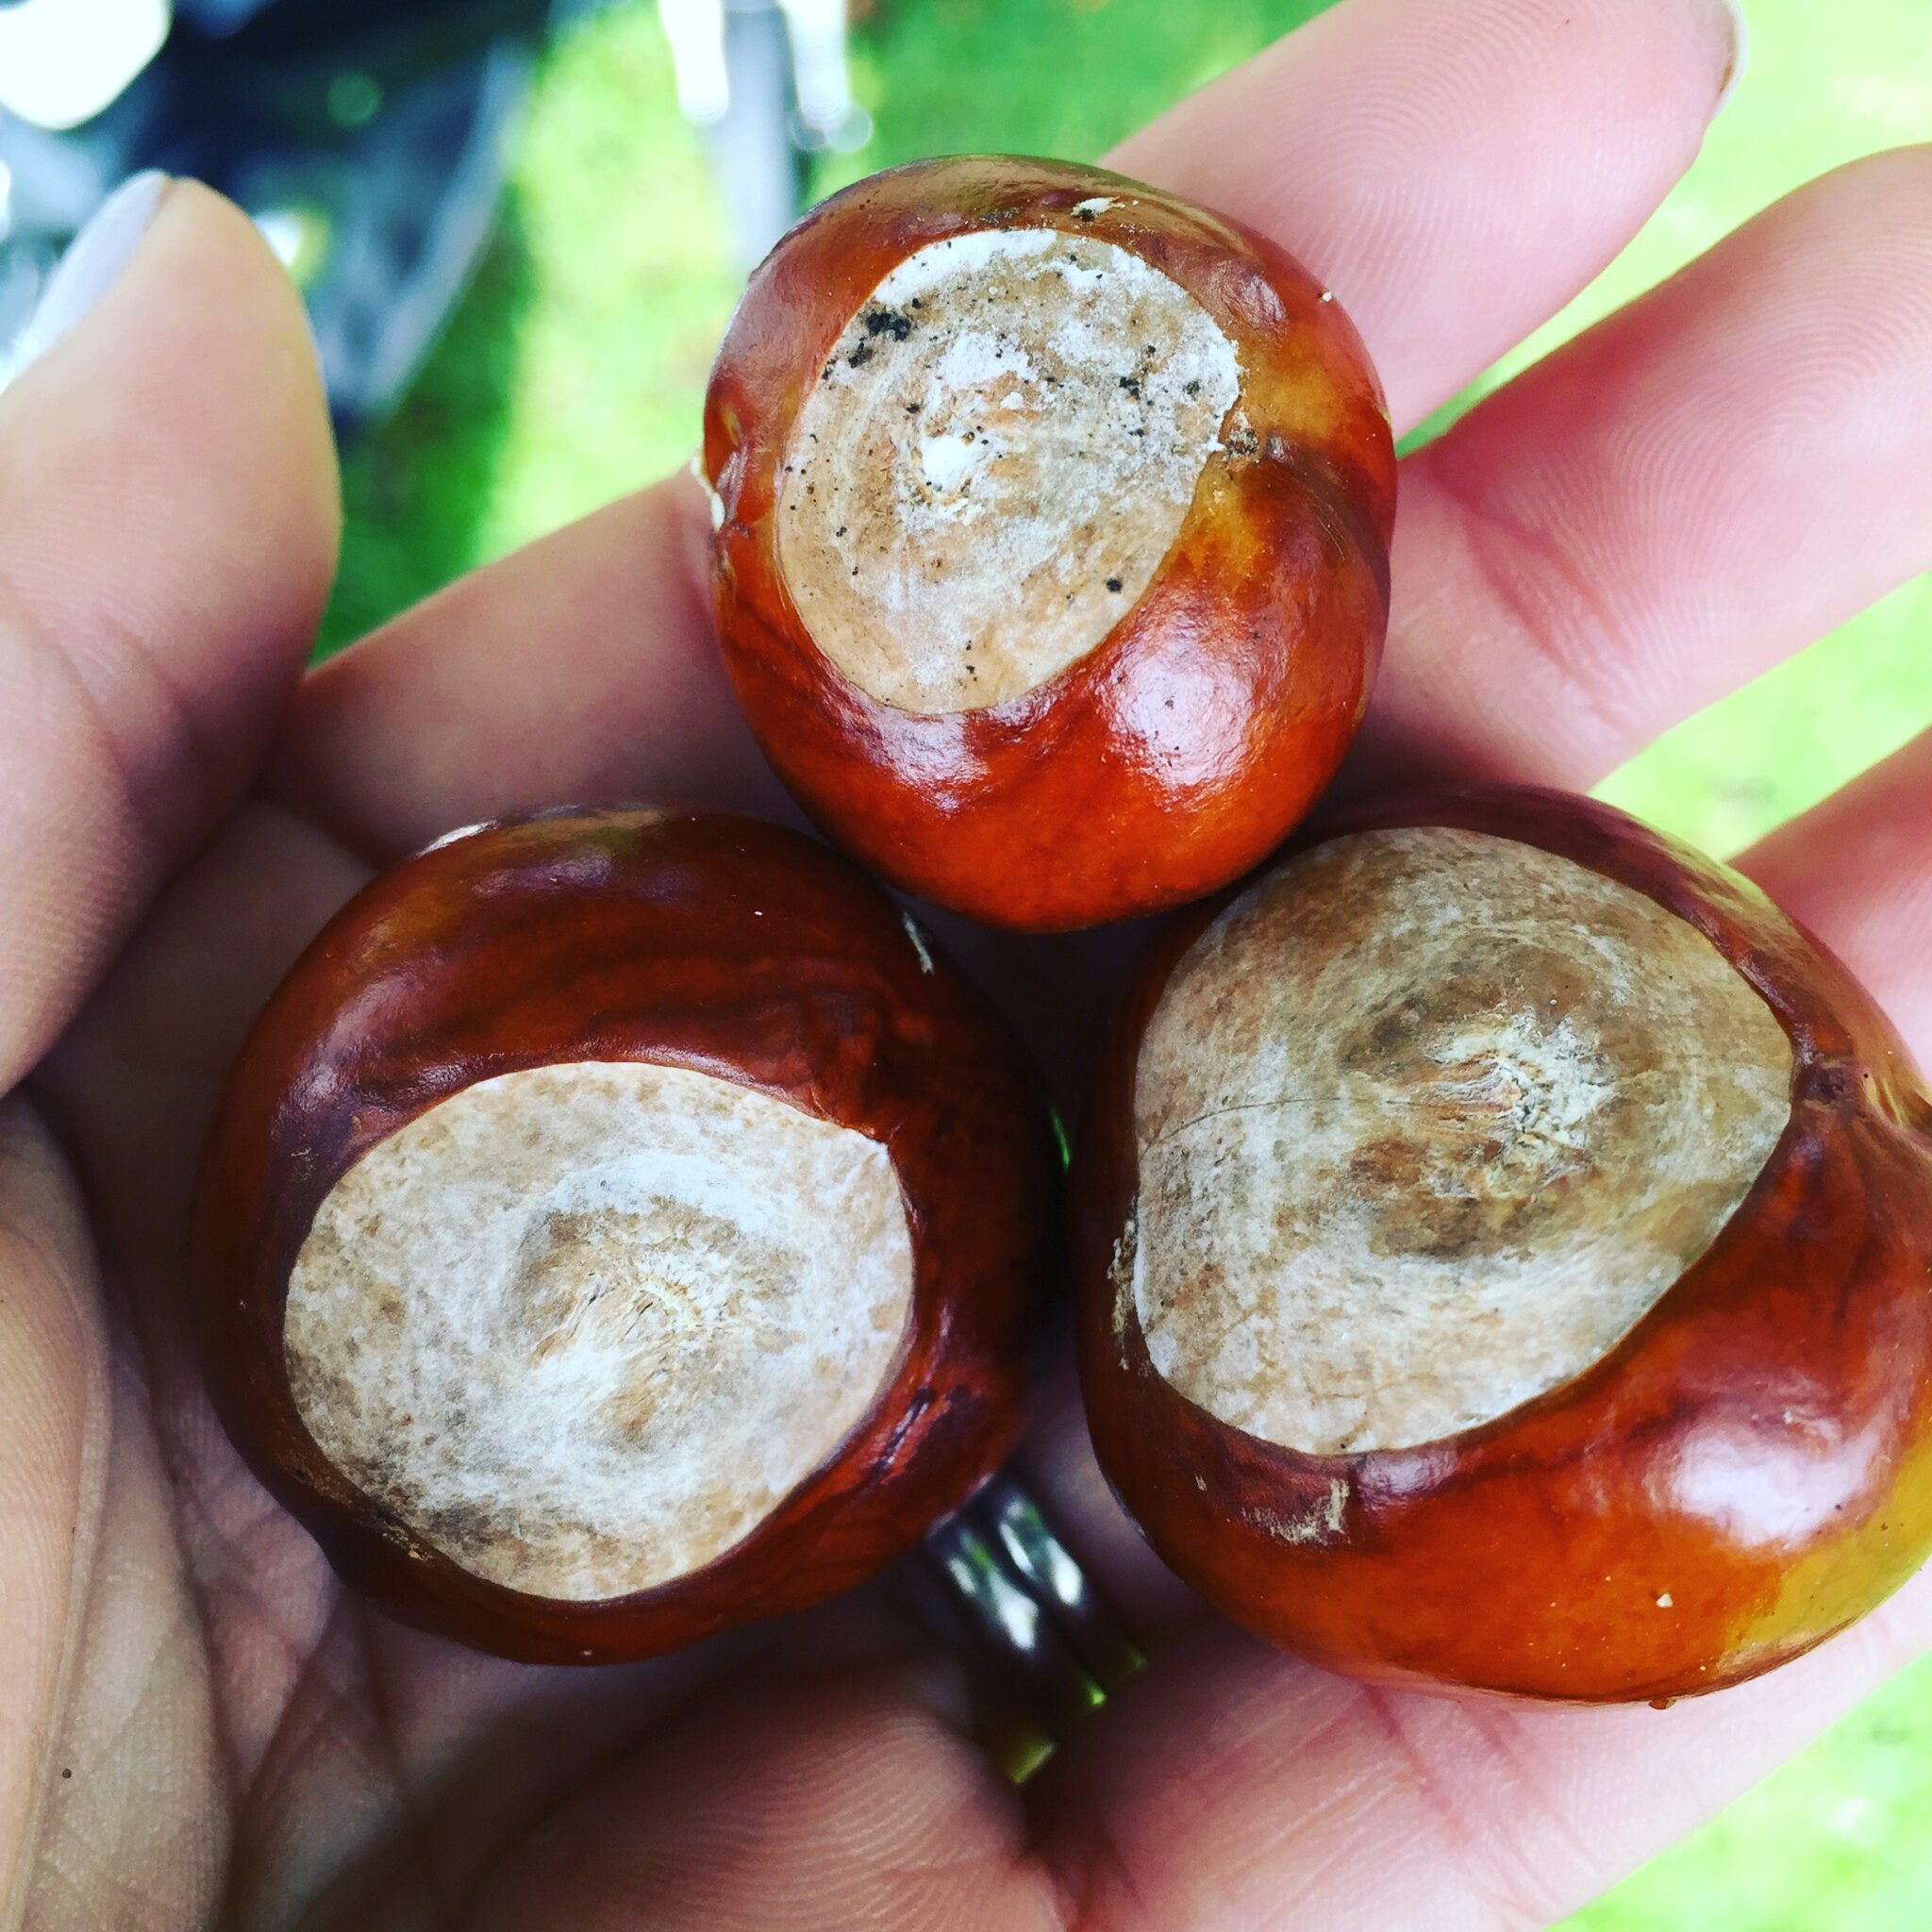 A person's hand holding three chestnuts gathered for collecting conkers.